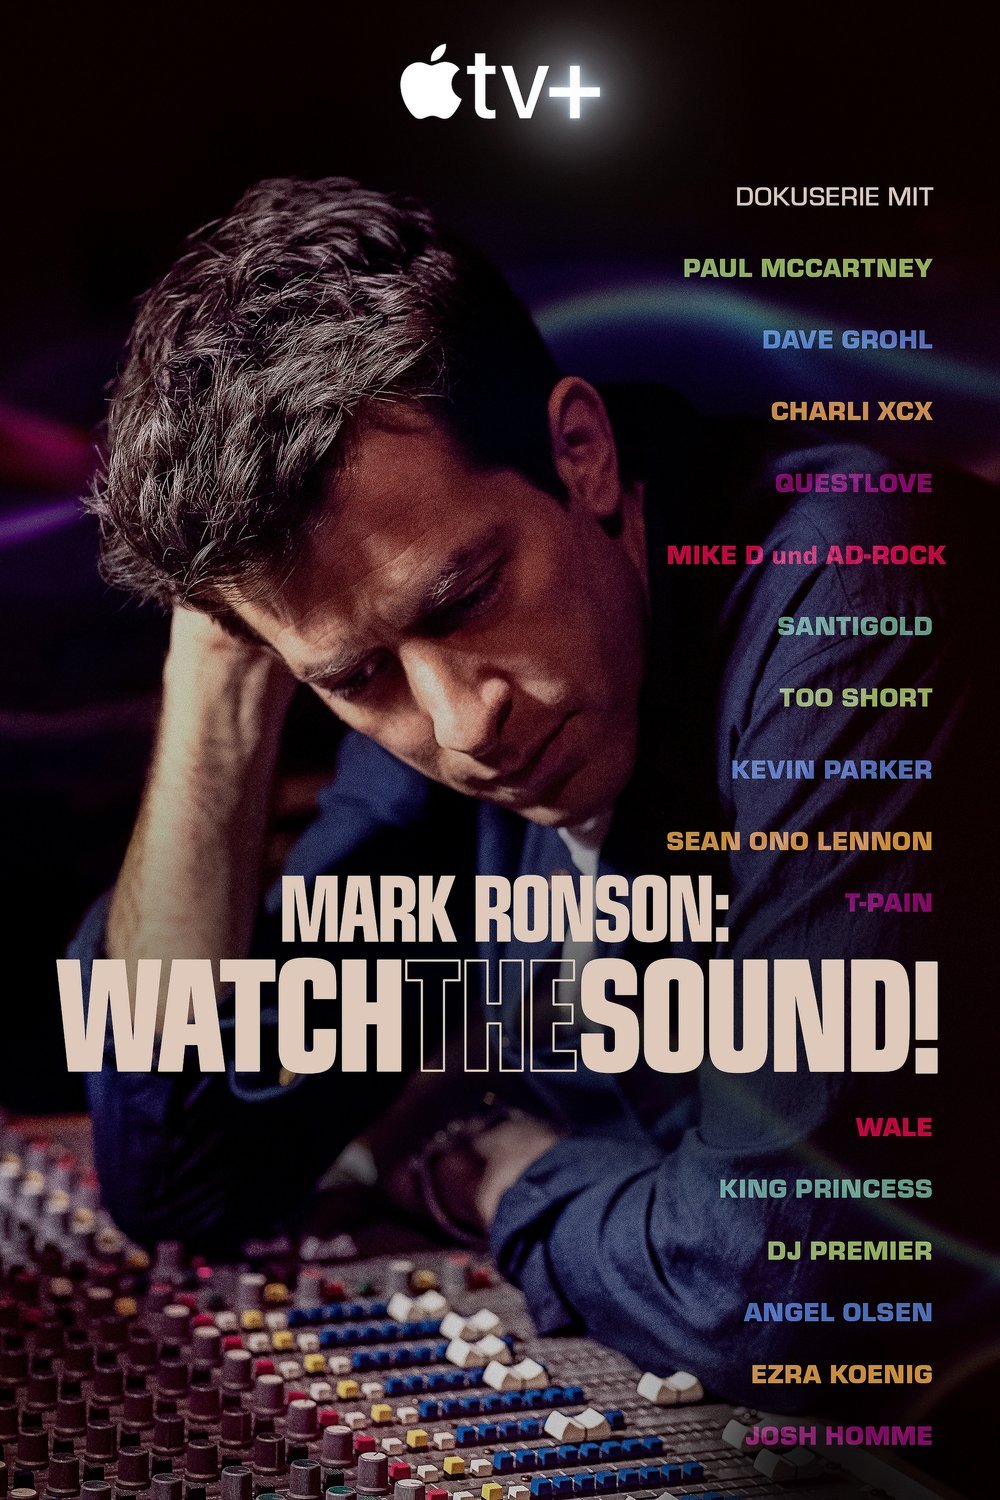 Poster of the movie Watch the Sound with Mark Ronson